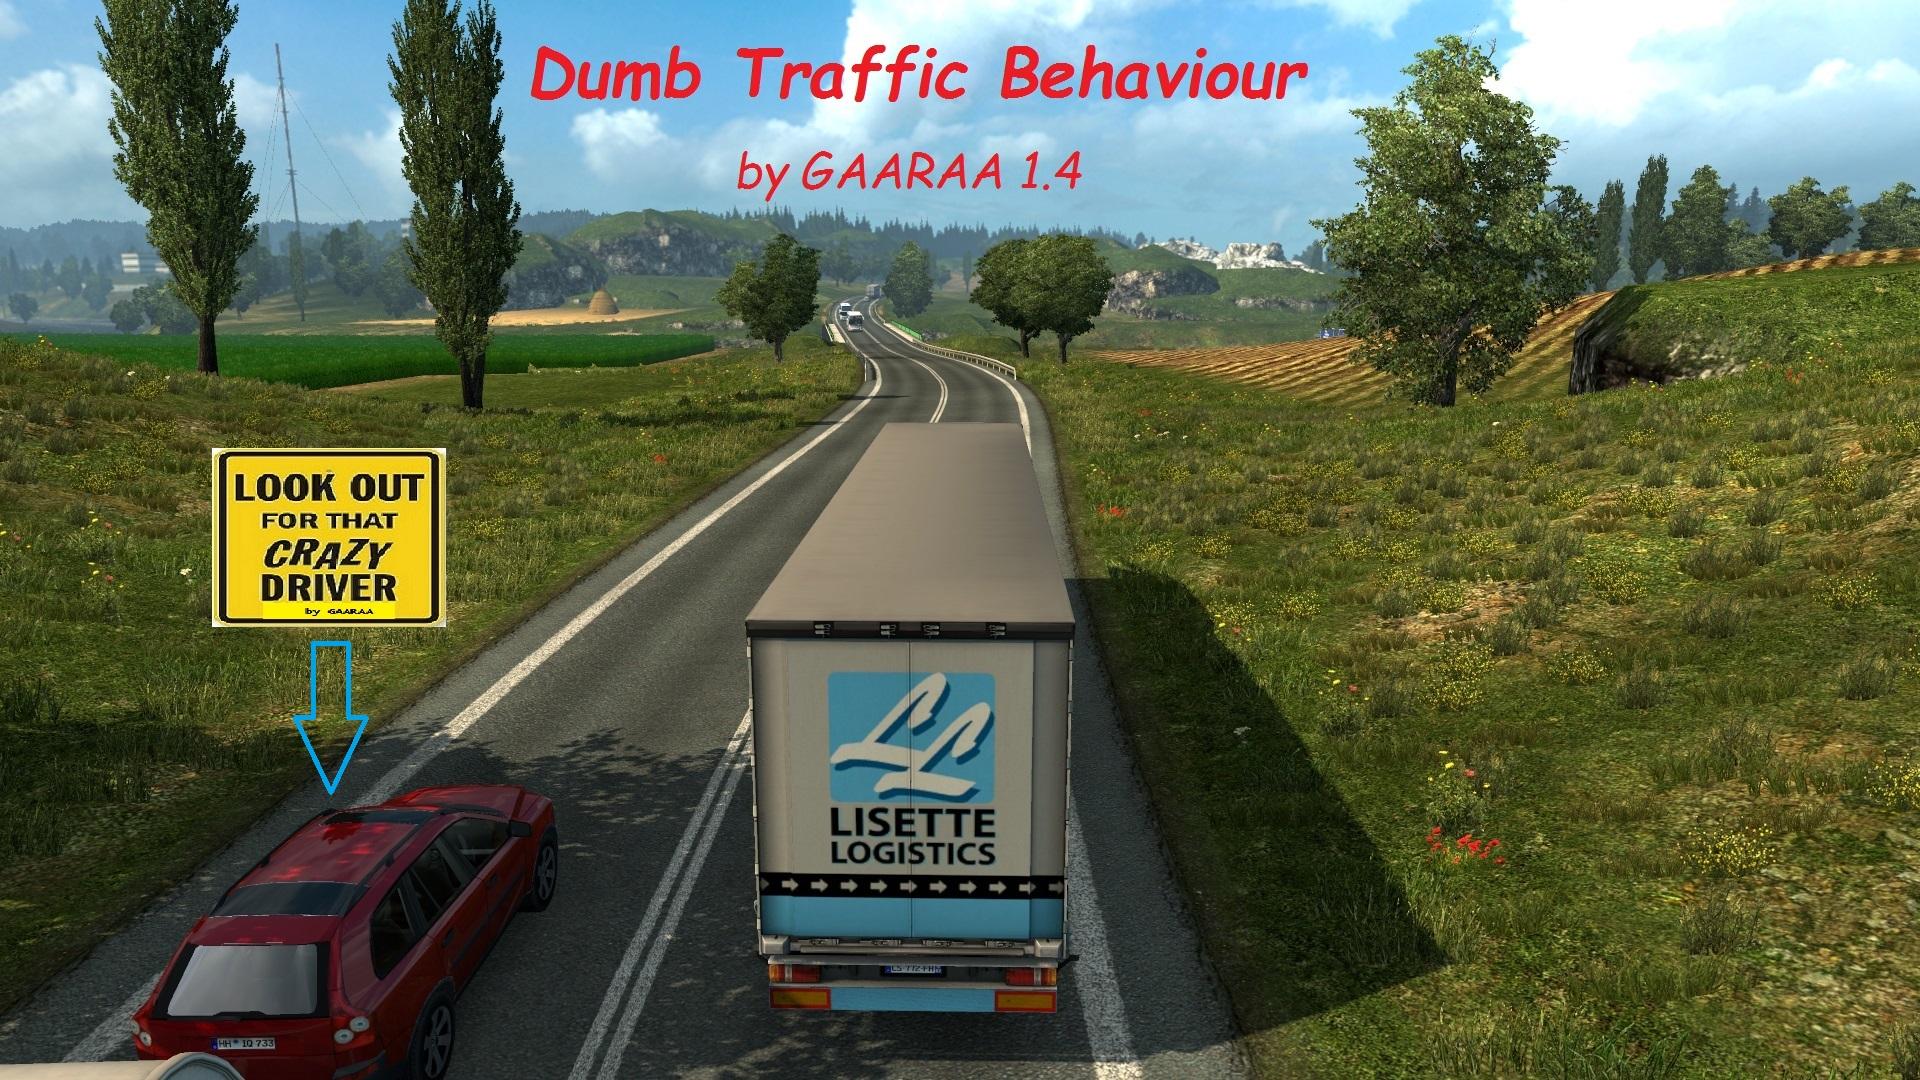 what is the difference between euro truck simulator 2 and euro truck simulator 2 gold